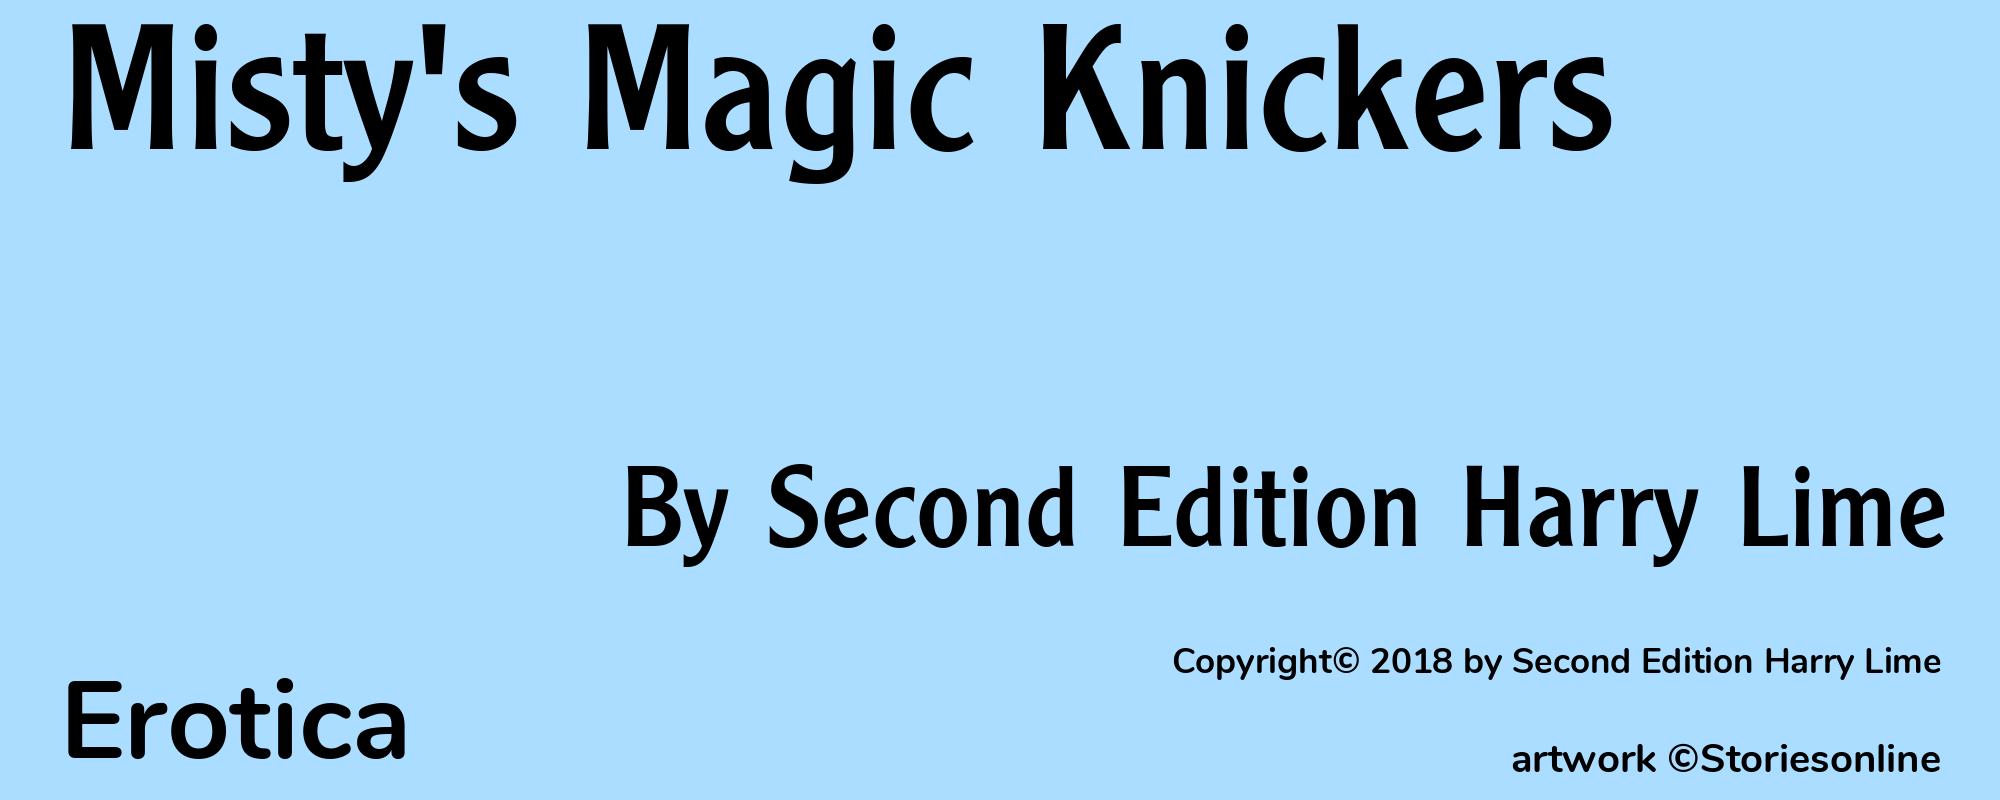 Misty's Magic Knickers - Cover